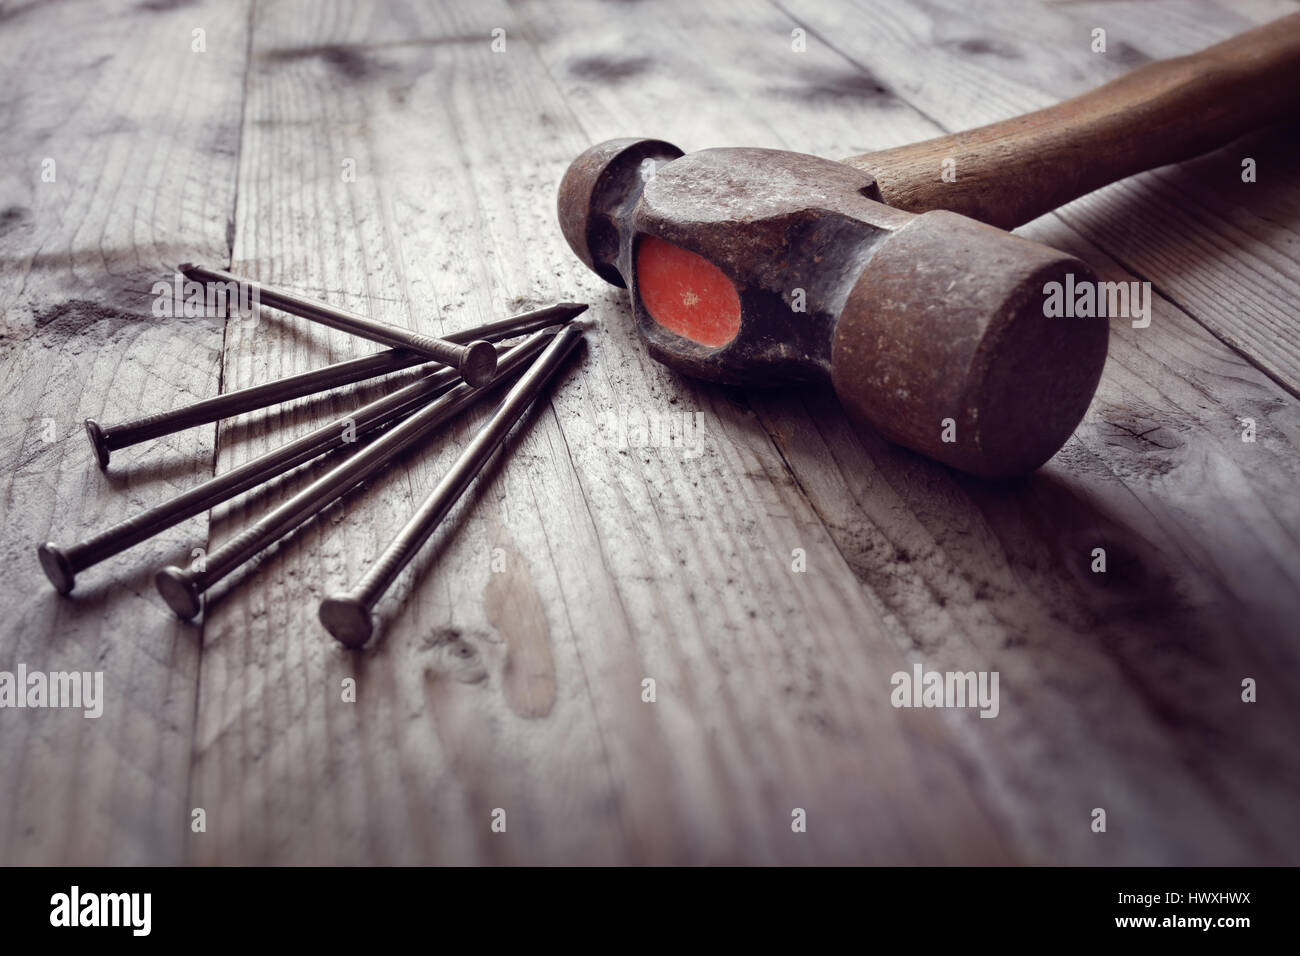 Hammer and nails on floorboards concept for construction, diy, tools and home improvement Stock Photo